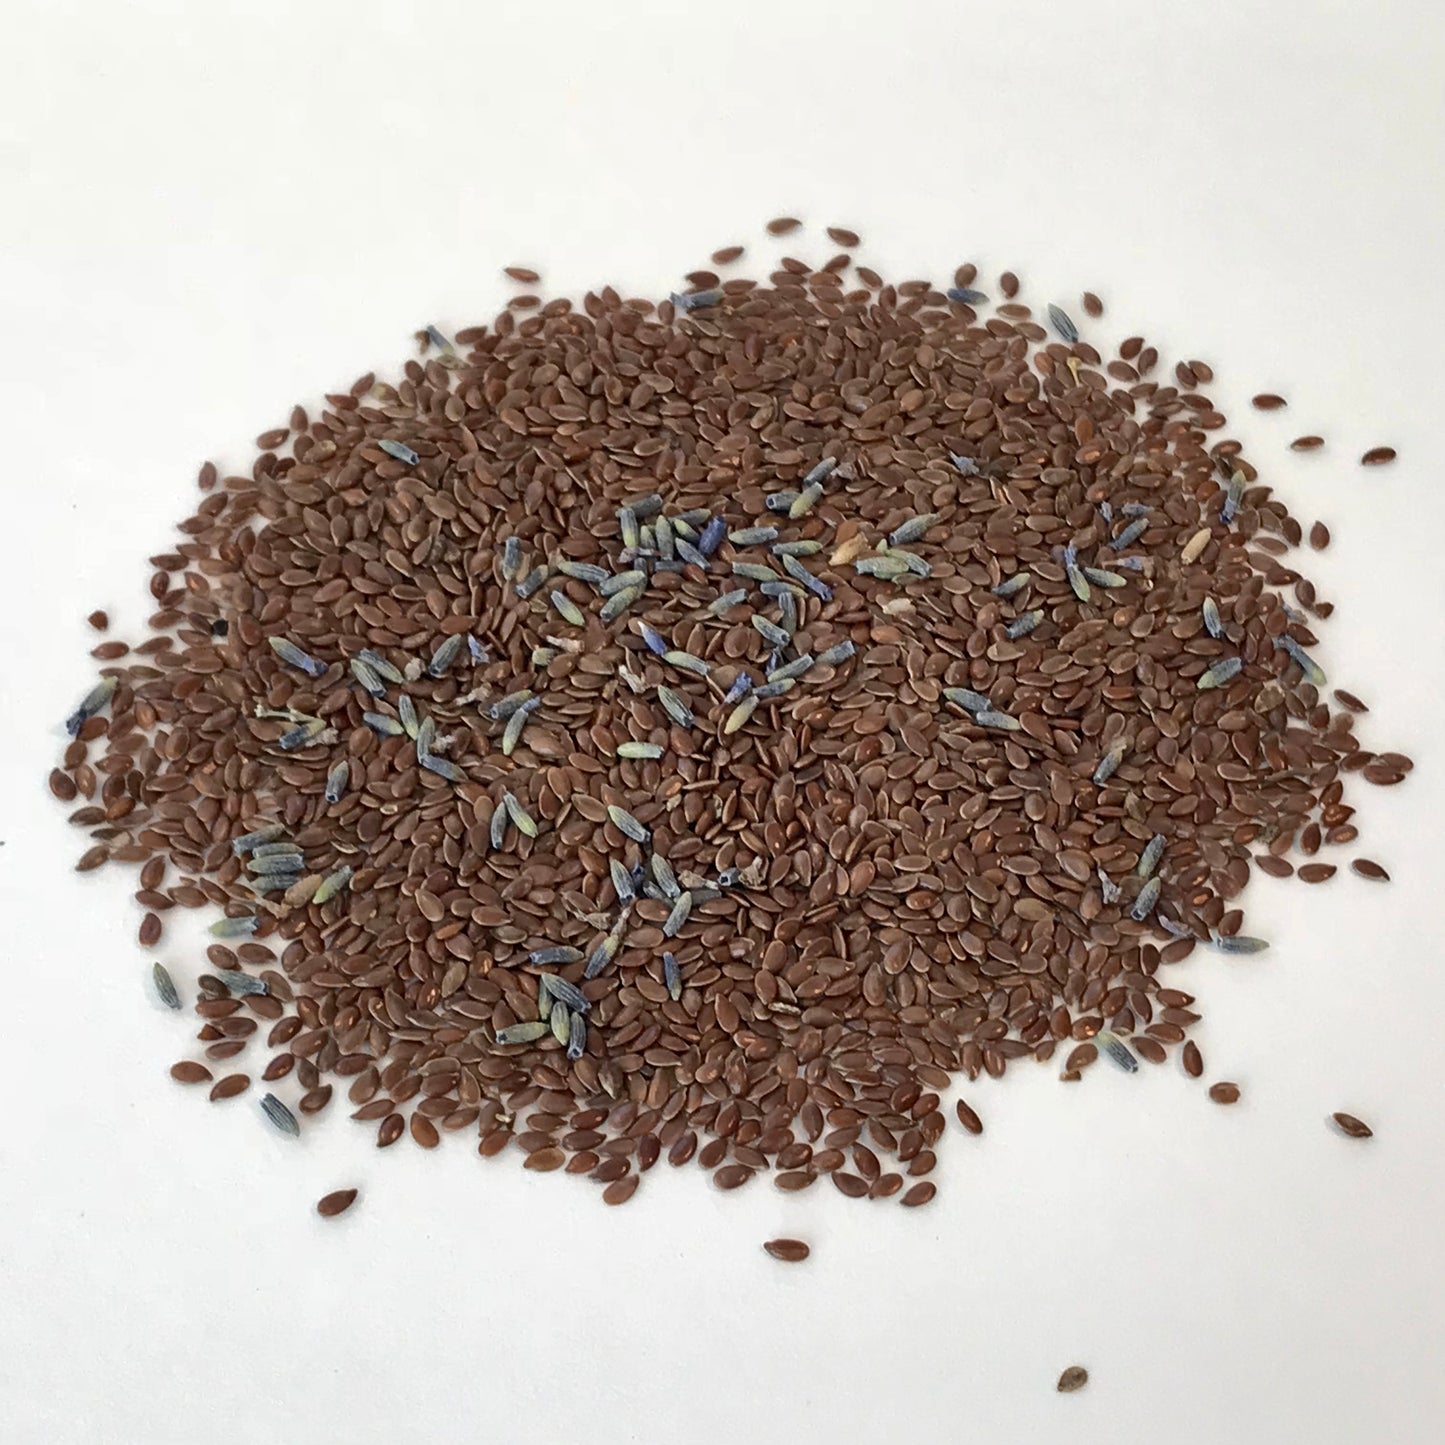 This is a photo of a pile of flax seeds and lavender buds taken on a white background.